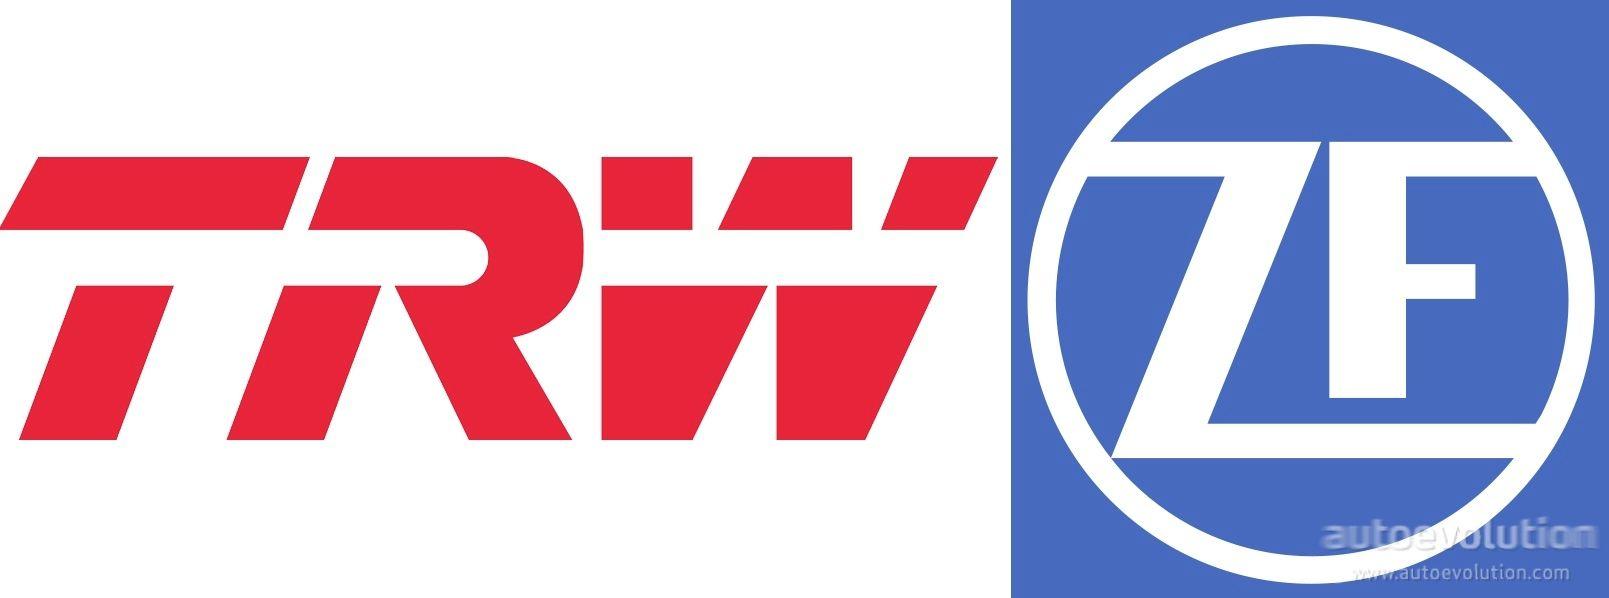 New ZF Logo - TRW-ZF: new commision for Galvo Service - Galvo Service